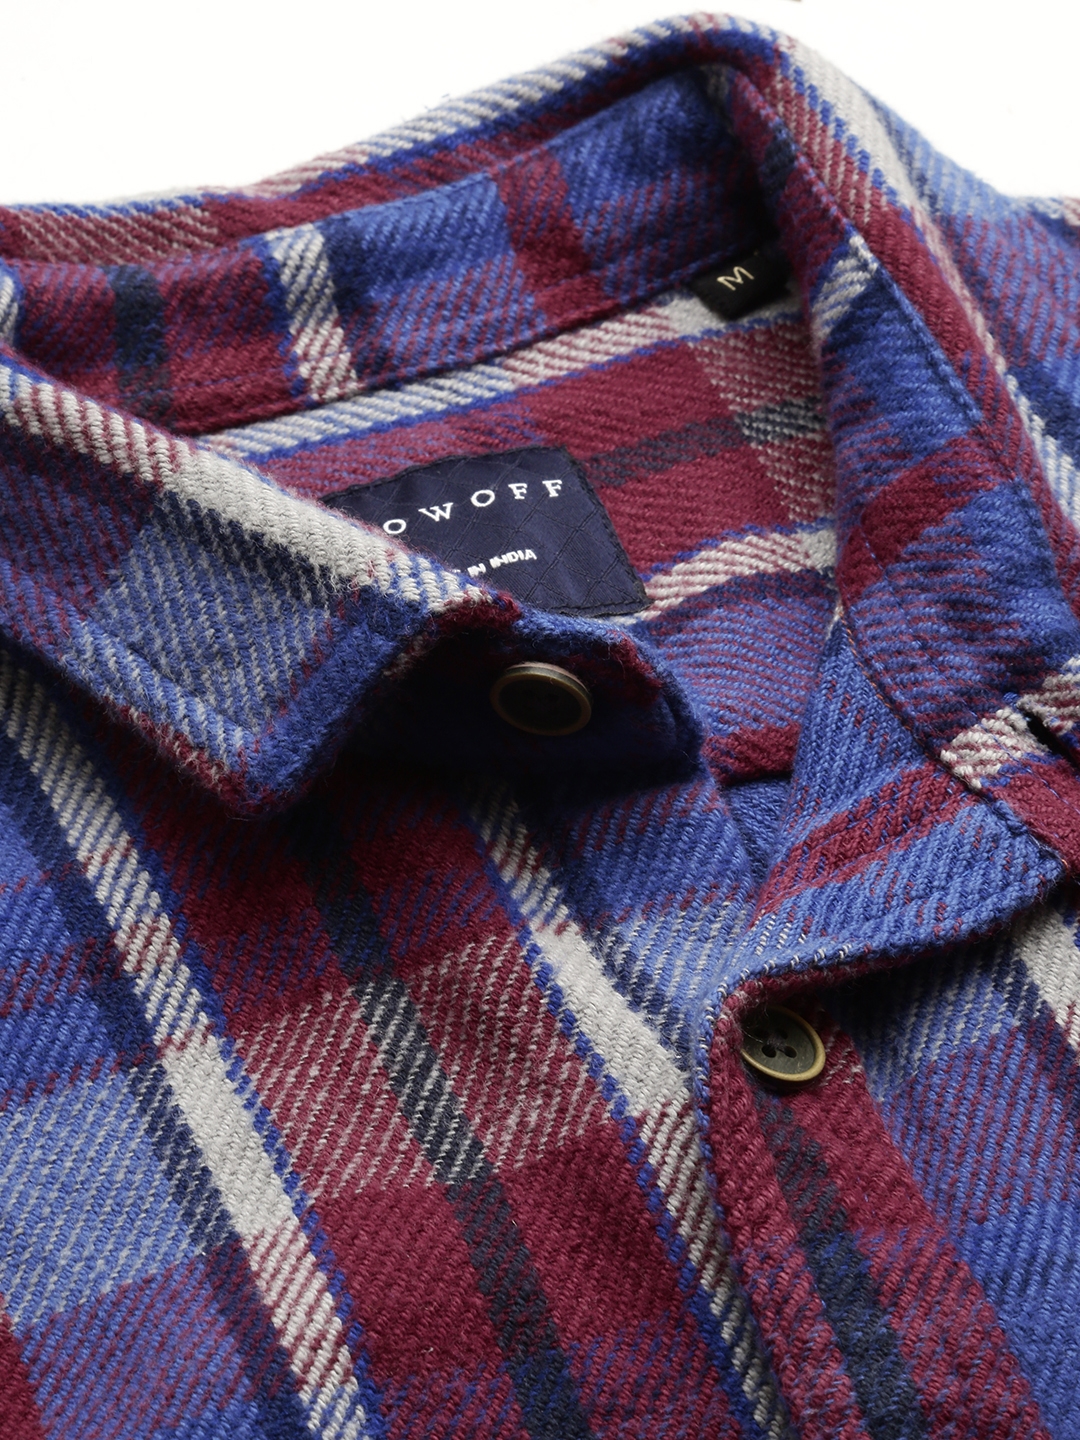 Men's Blue Wool Checked Casual Shirts